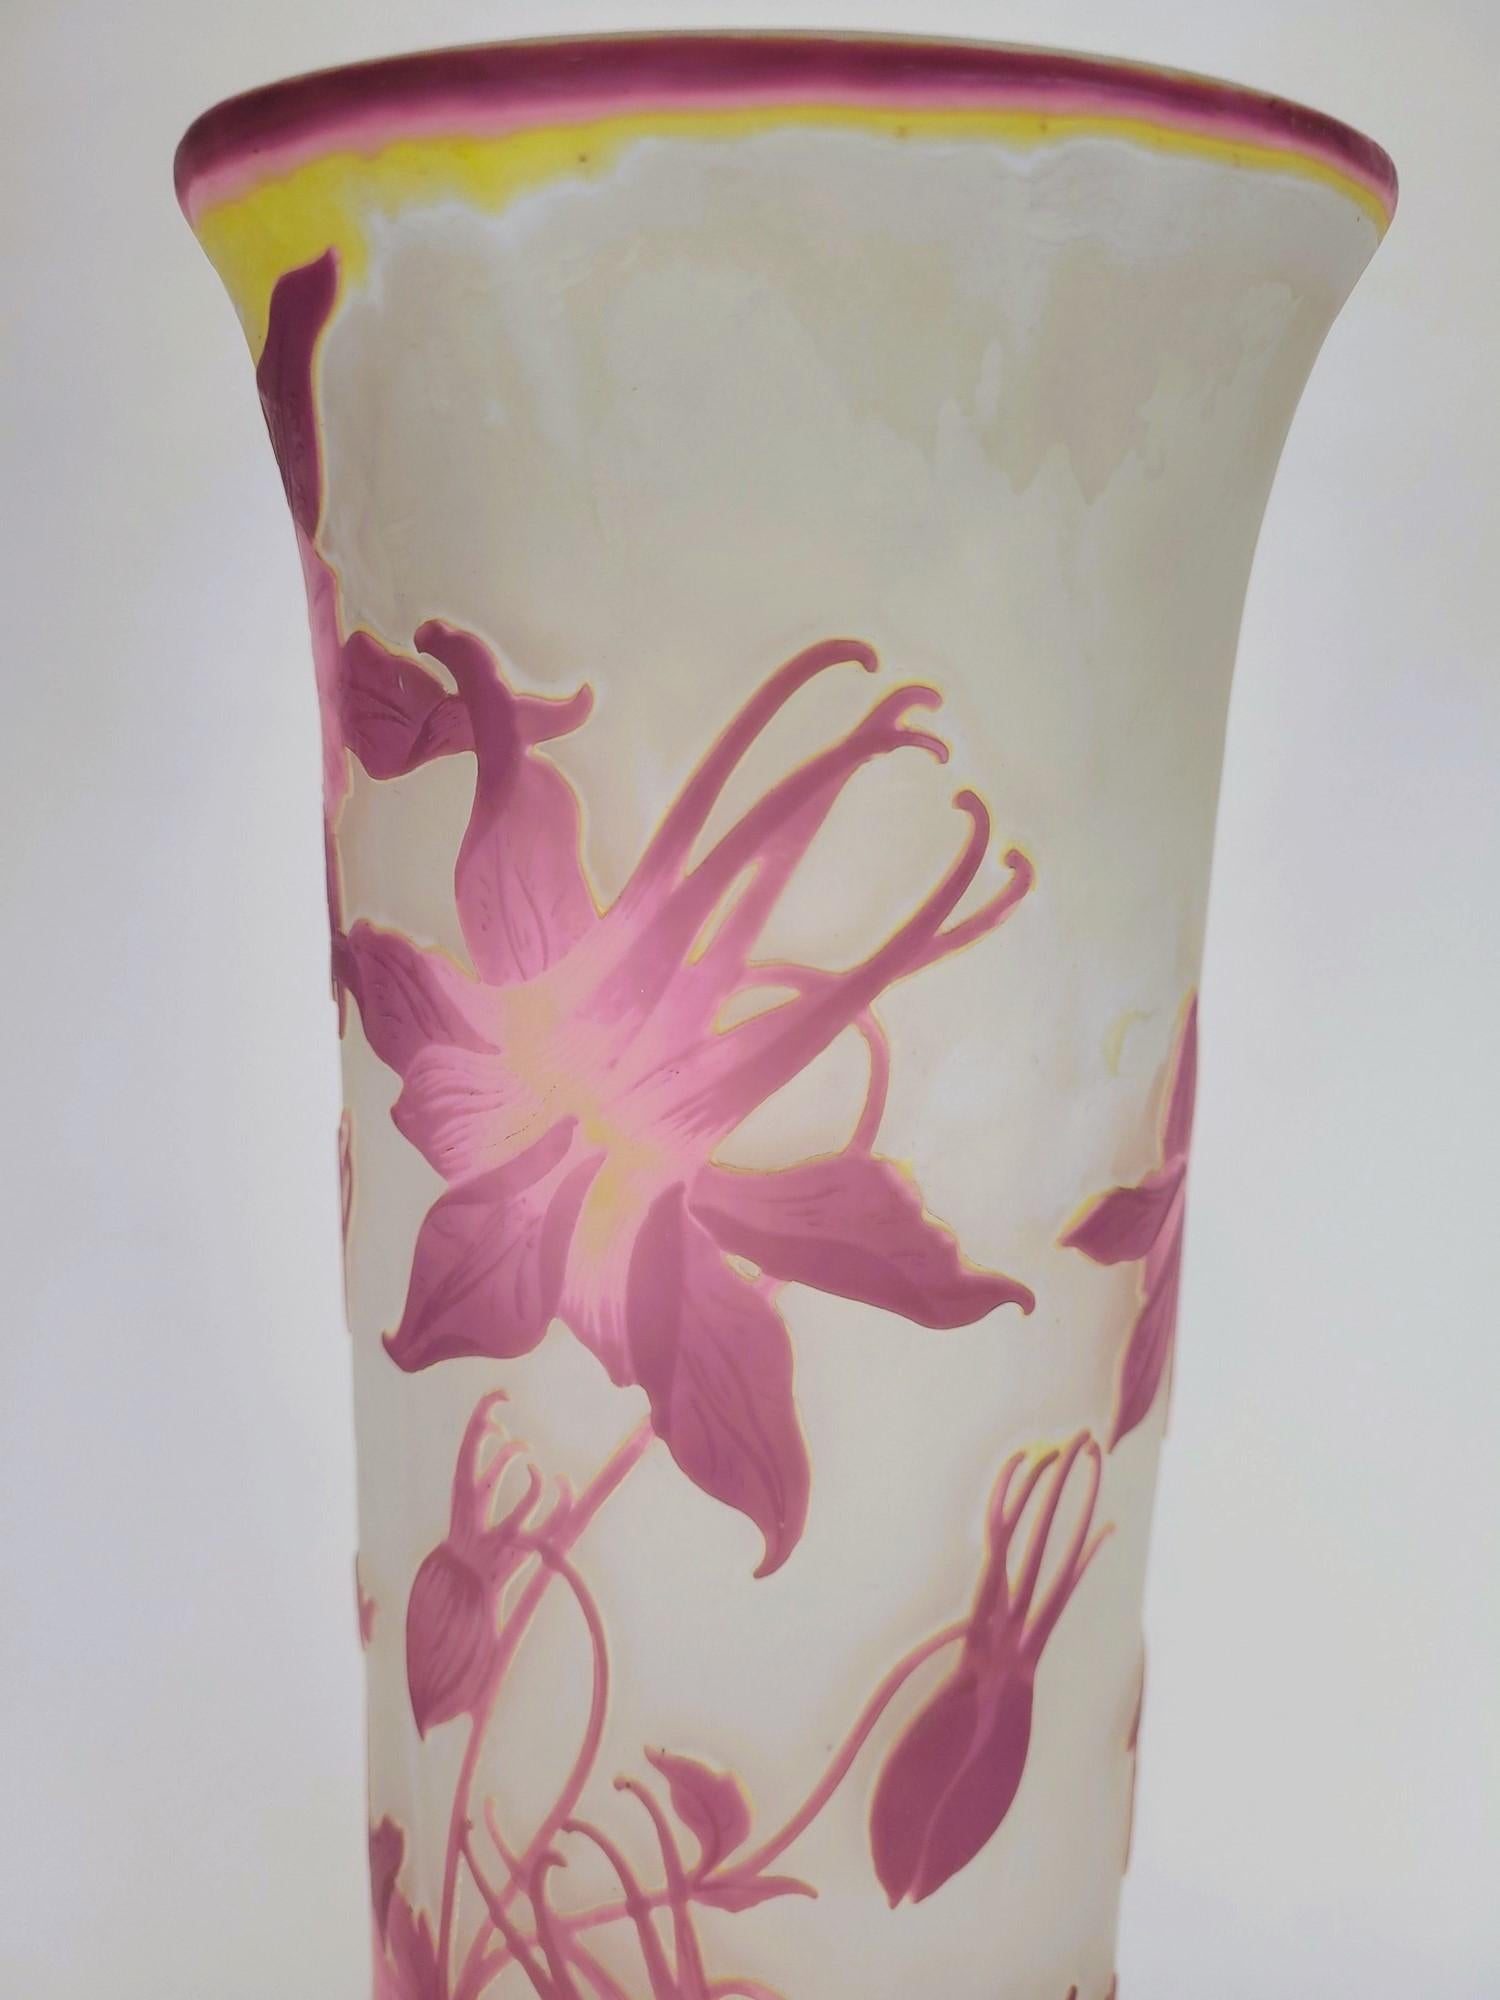 Large multi-layered glass vase, with acid-etched decoration, of comumbines in flowers and buds

Japanese-style Gallé signature

Good condition, no cracks or chips

Early 20th century 

height 62 cm
diameter 23